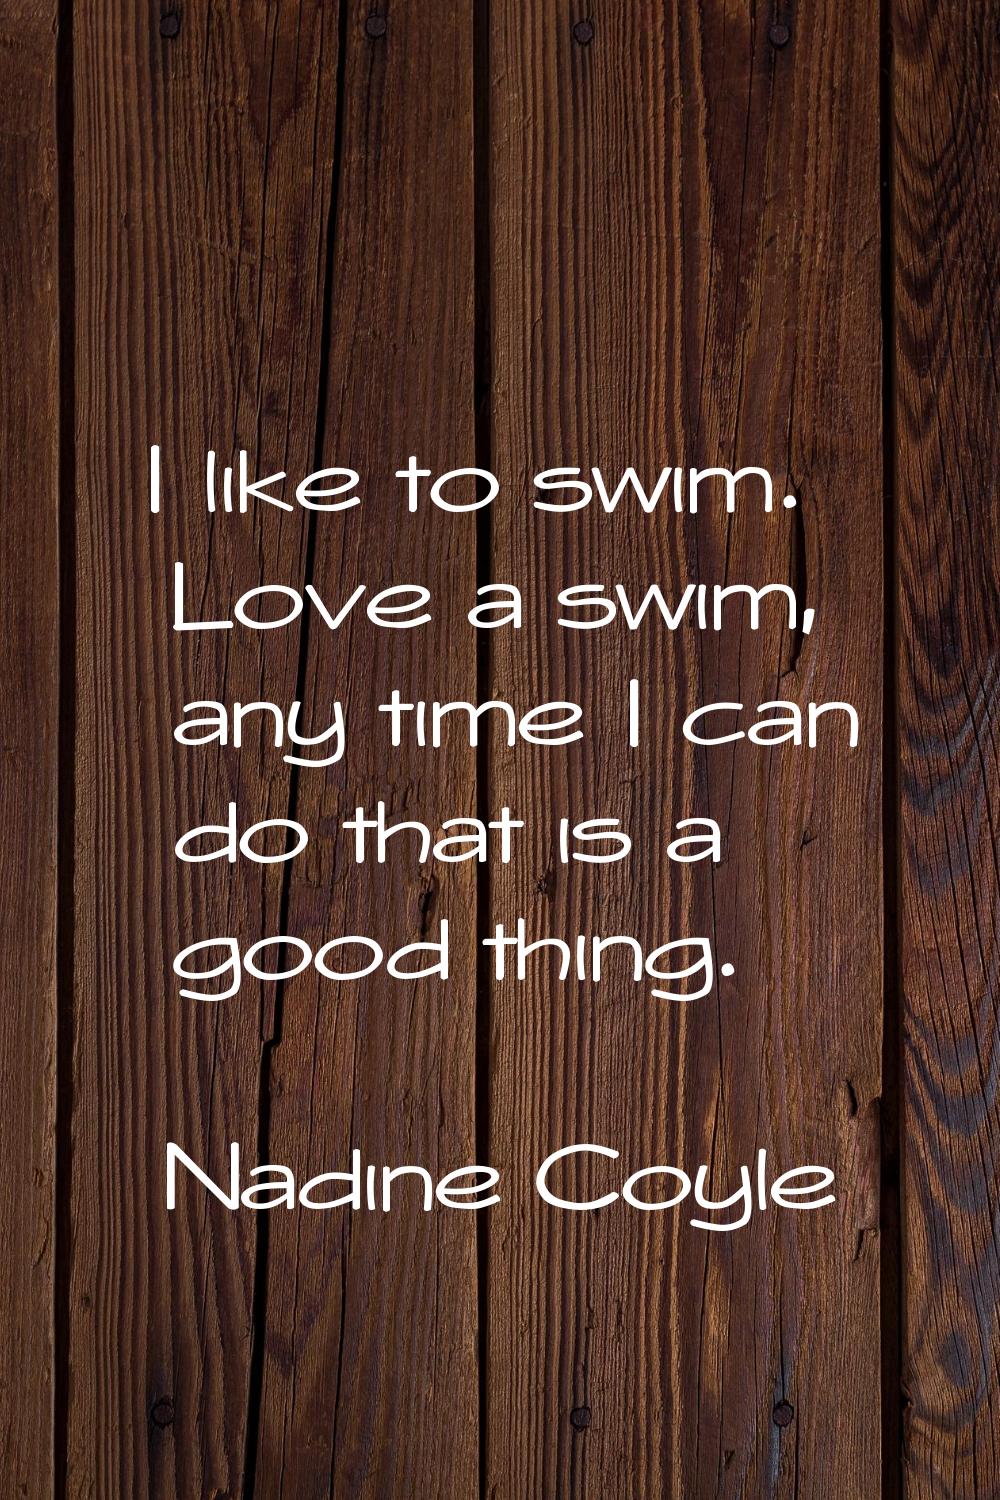 I like to swim. Love a swim, any time I can do that is a good thing.